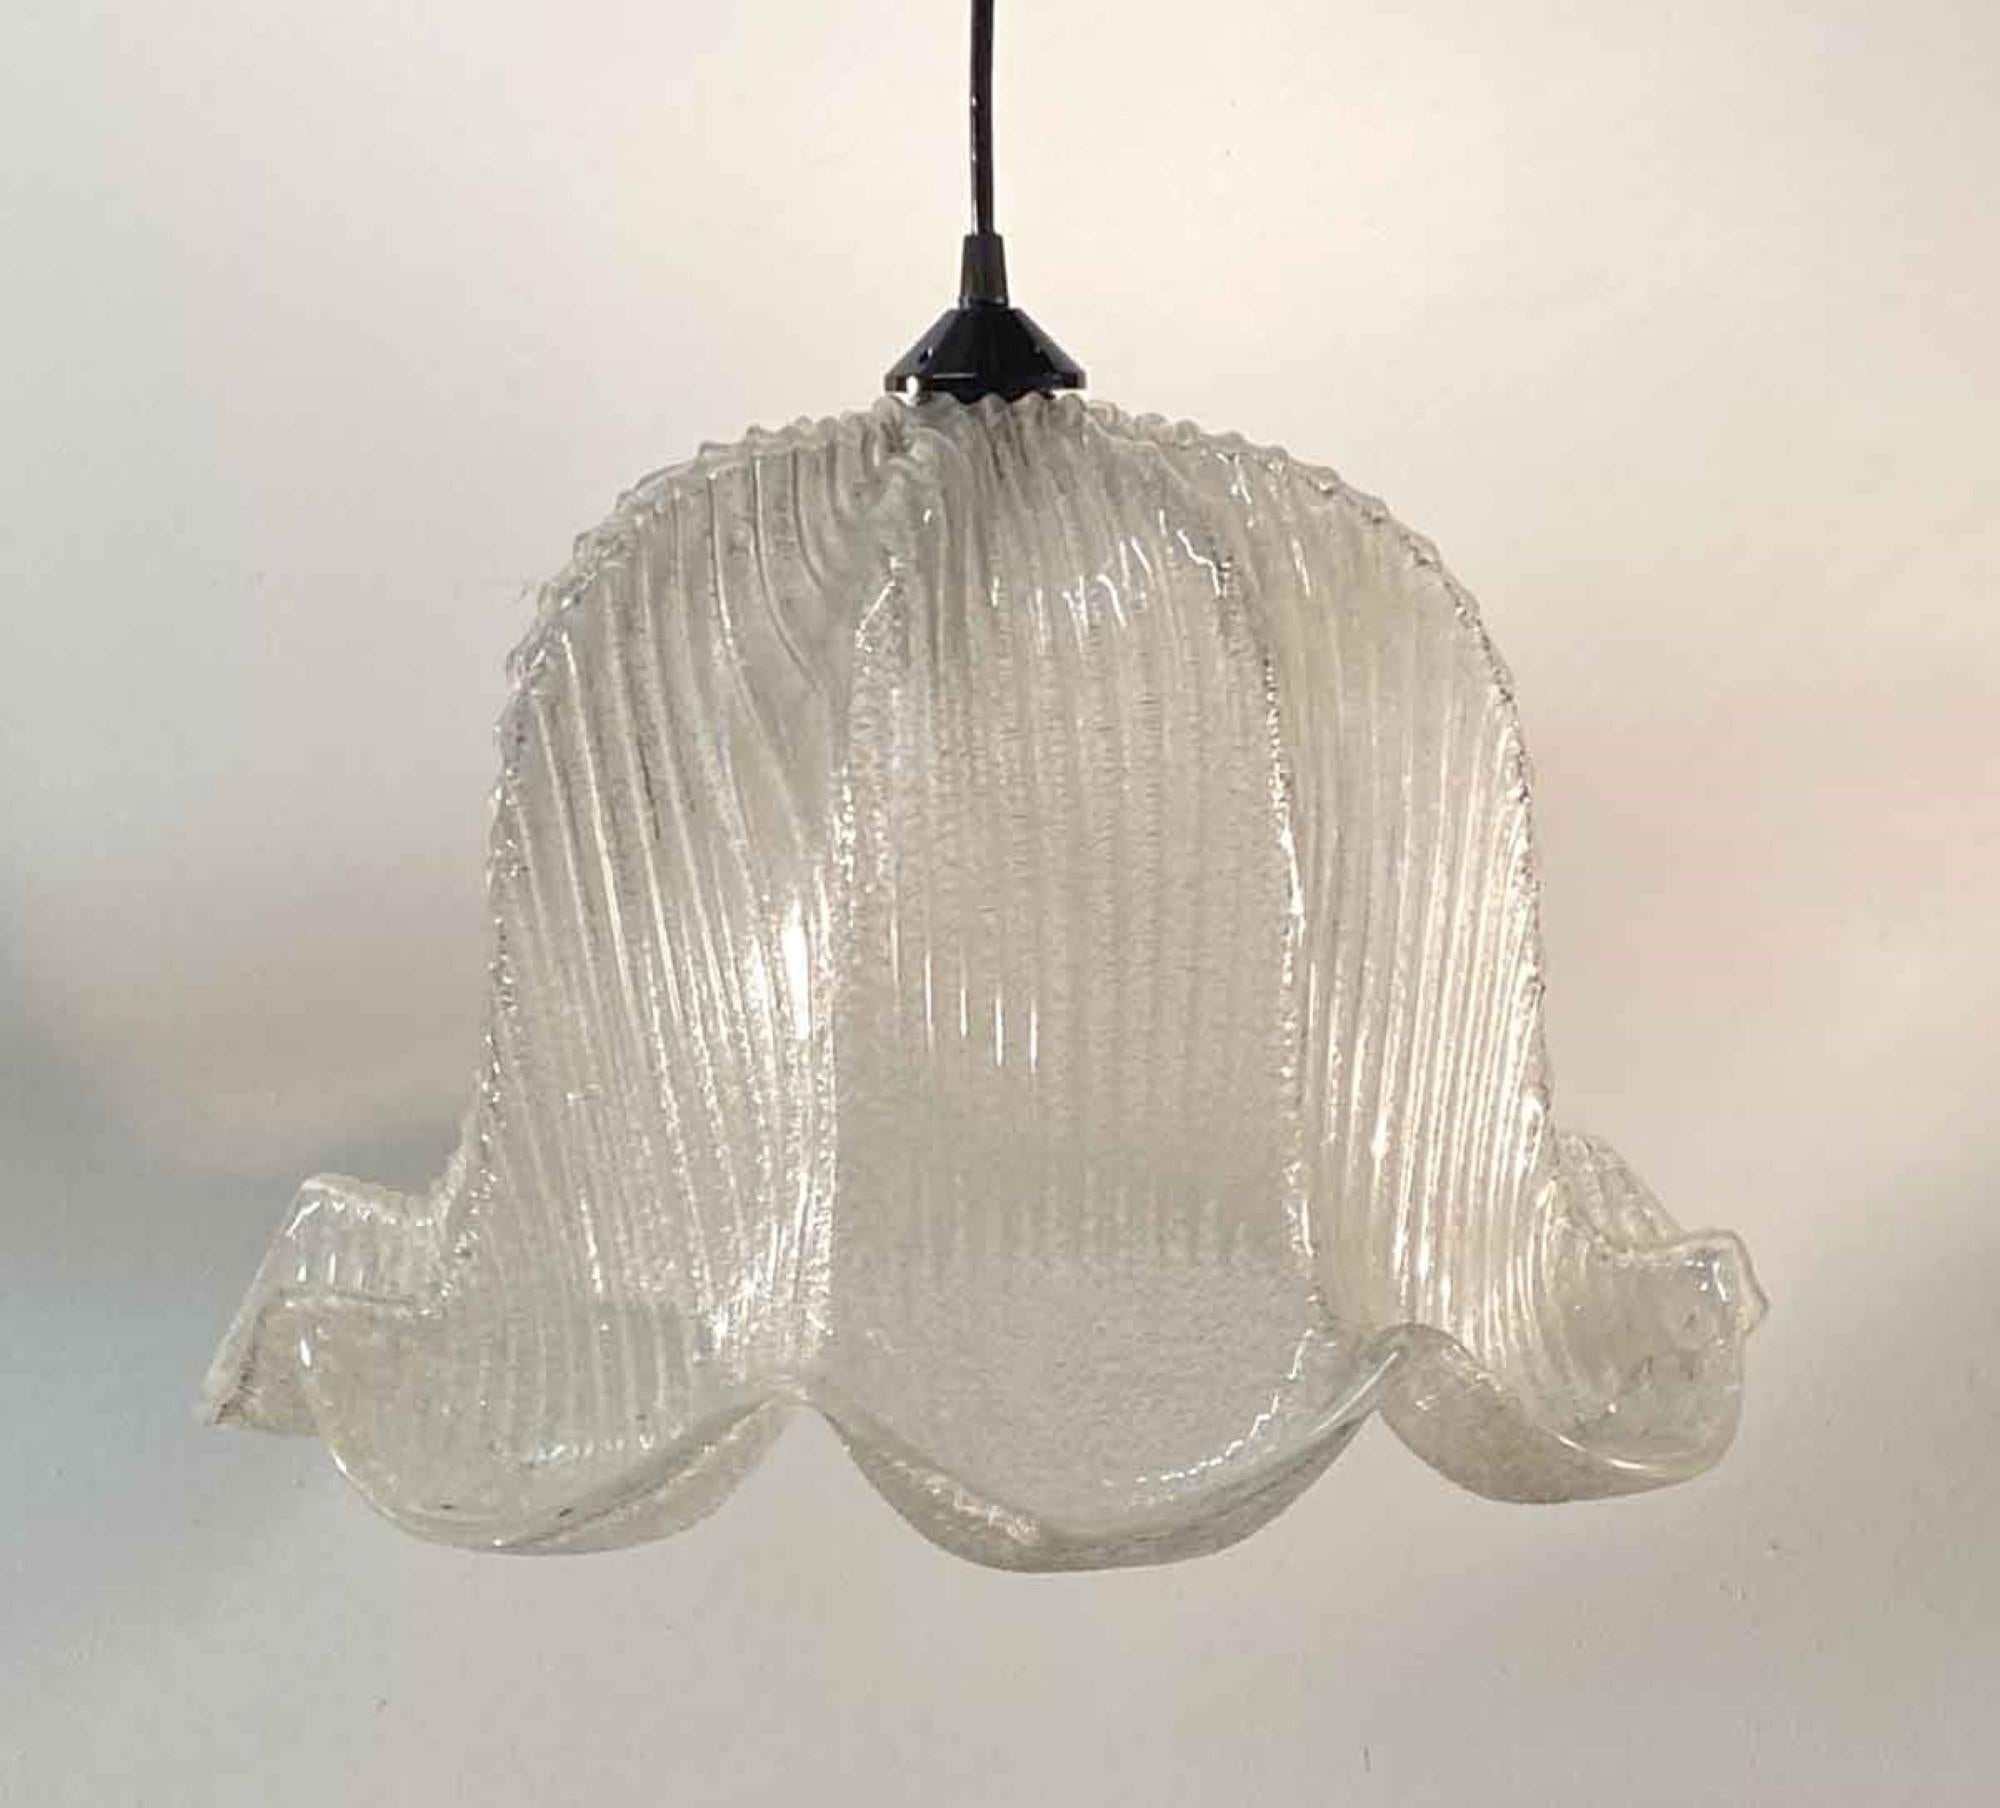 1970s hand blown or hand worked clear Italian Murano glass pendant light. Done in a Mid-Century Modern style. The hardware can be done in a white or black cord, antique brass or a polished nickel pole. Price includes restoration. Please specify the